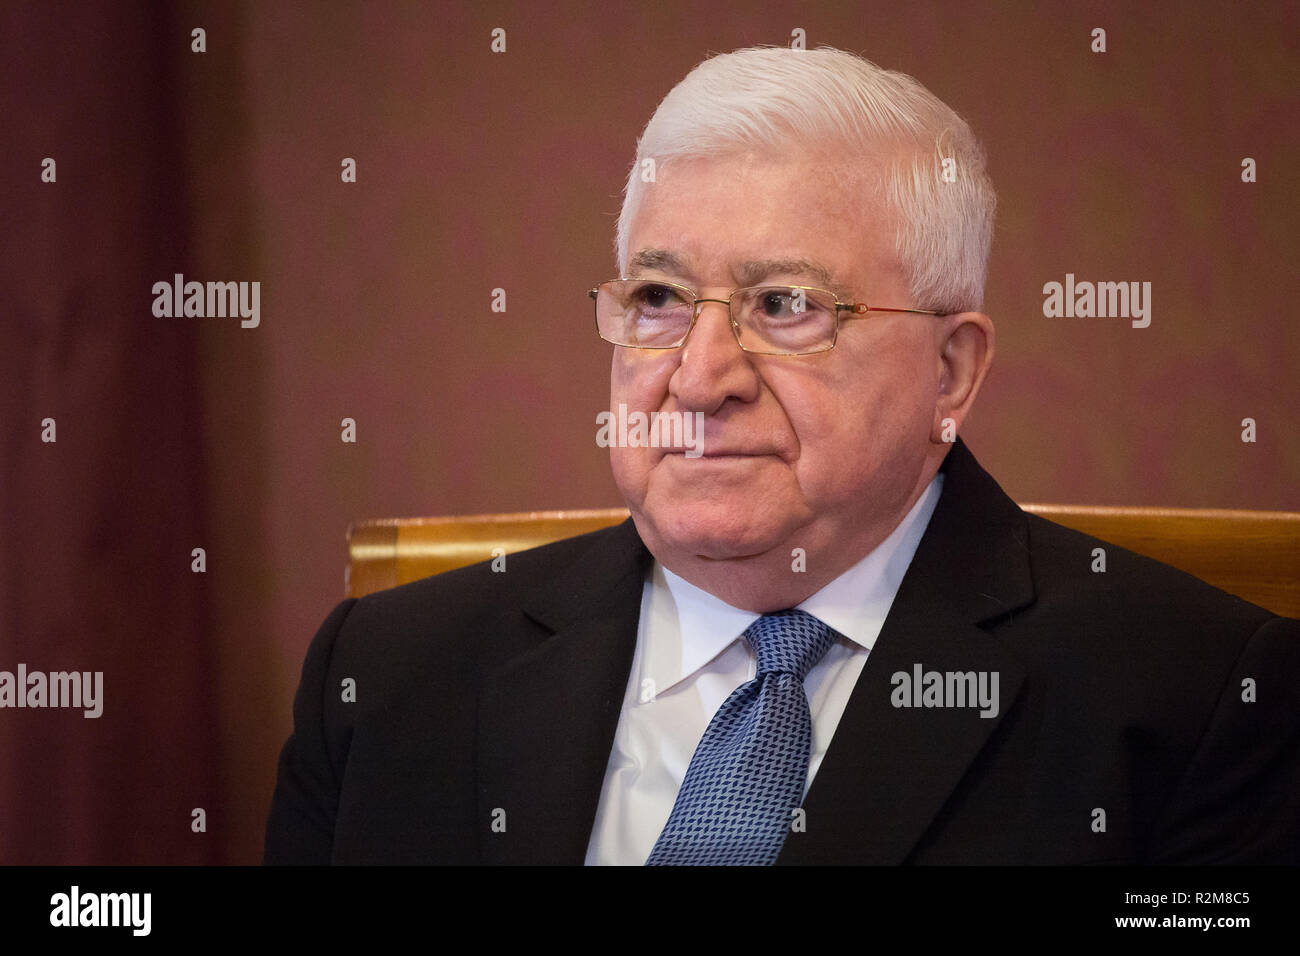 President of Iraq Fuad Masum meet with Prime Minister of Poland Beata Szydlo at Chancellery of the Prime Minister in Warsaw, Poland on 7 November 2017 Stock Photo